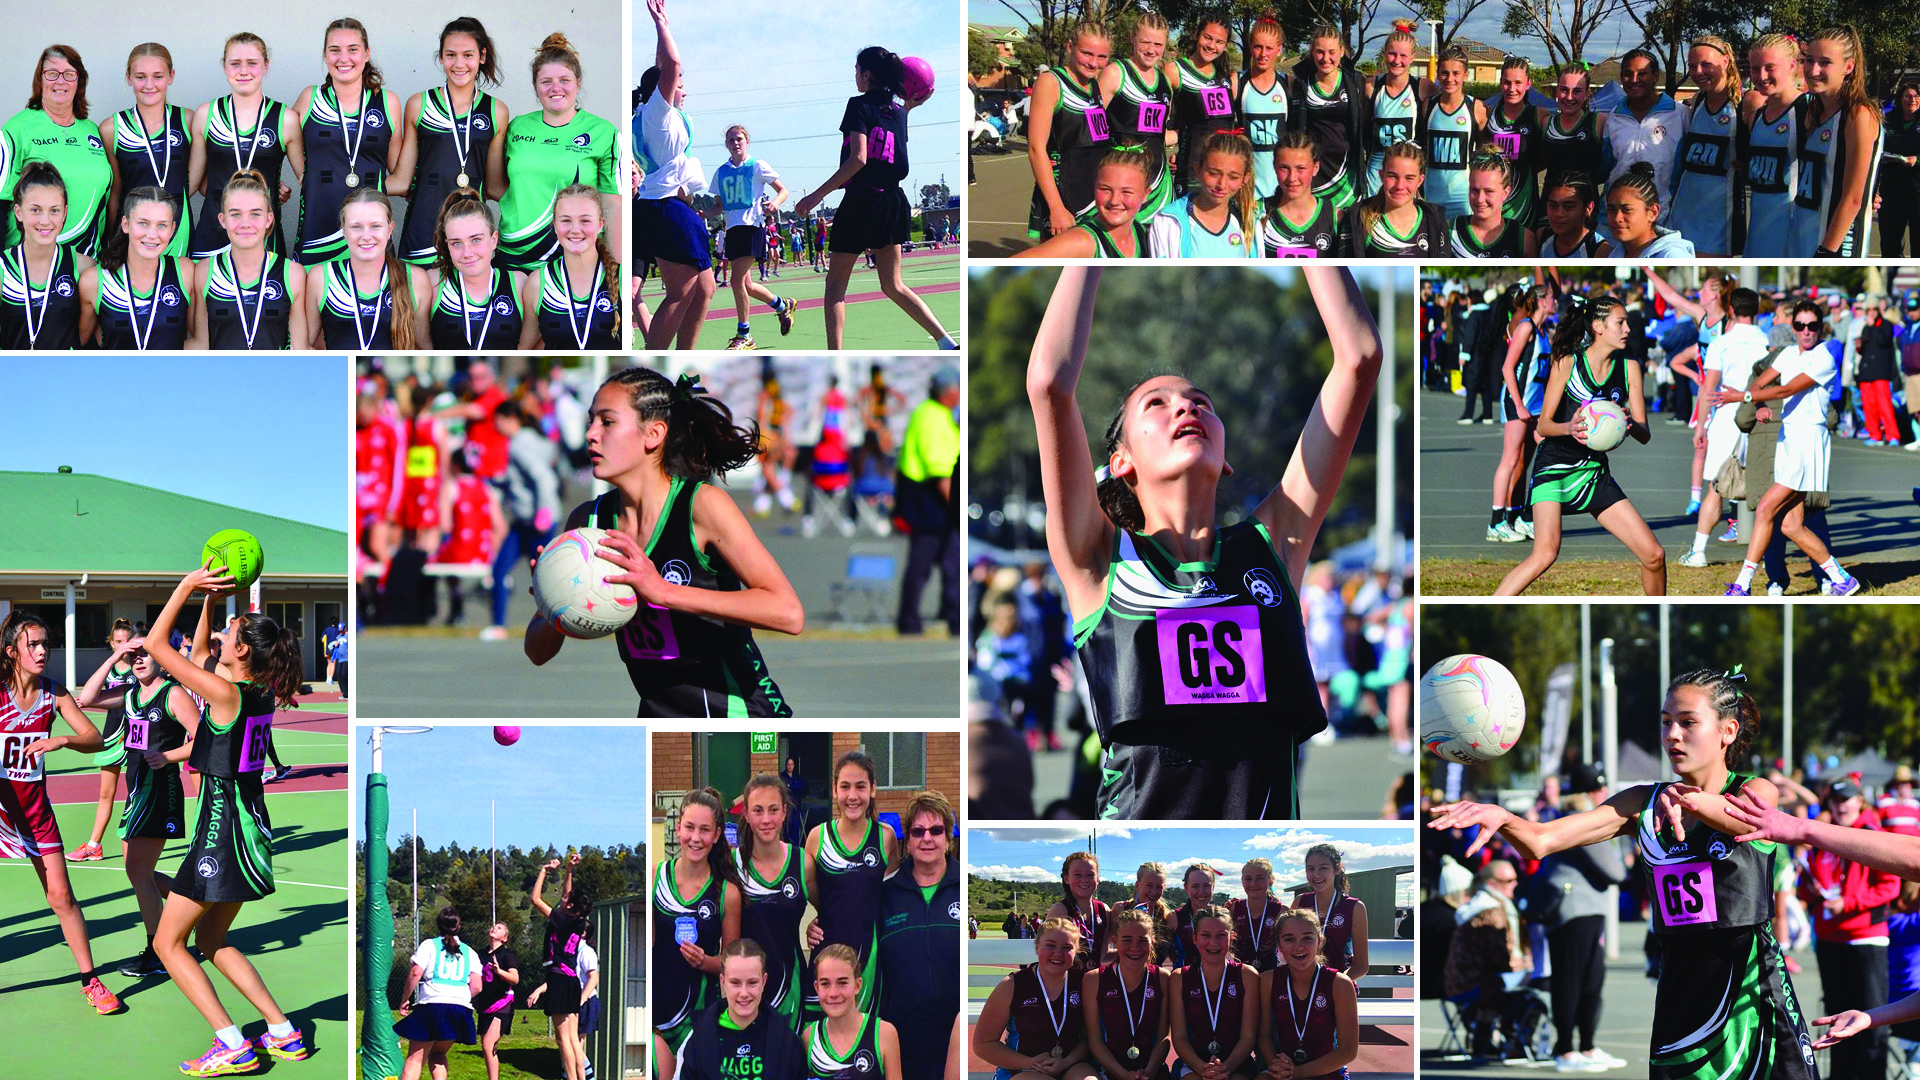 A montage of photos of Sophie Fawns playing netball as a child and teenager